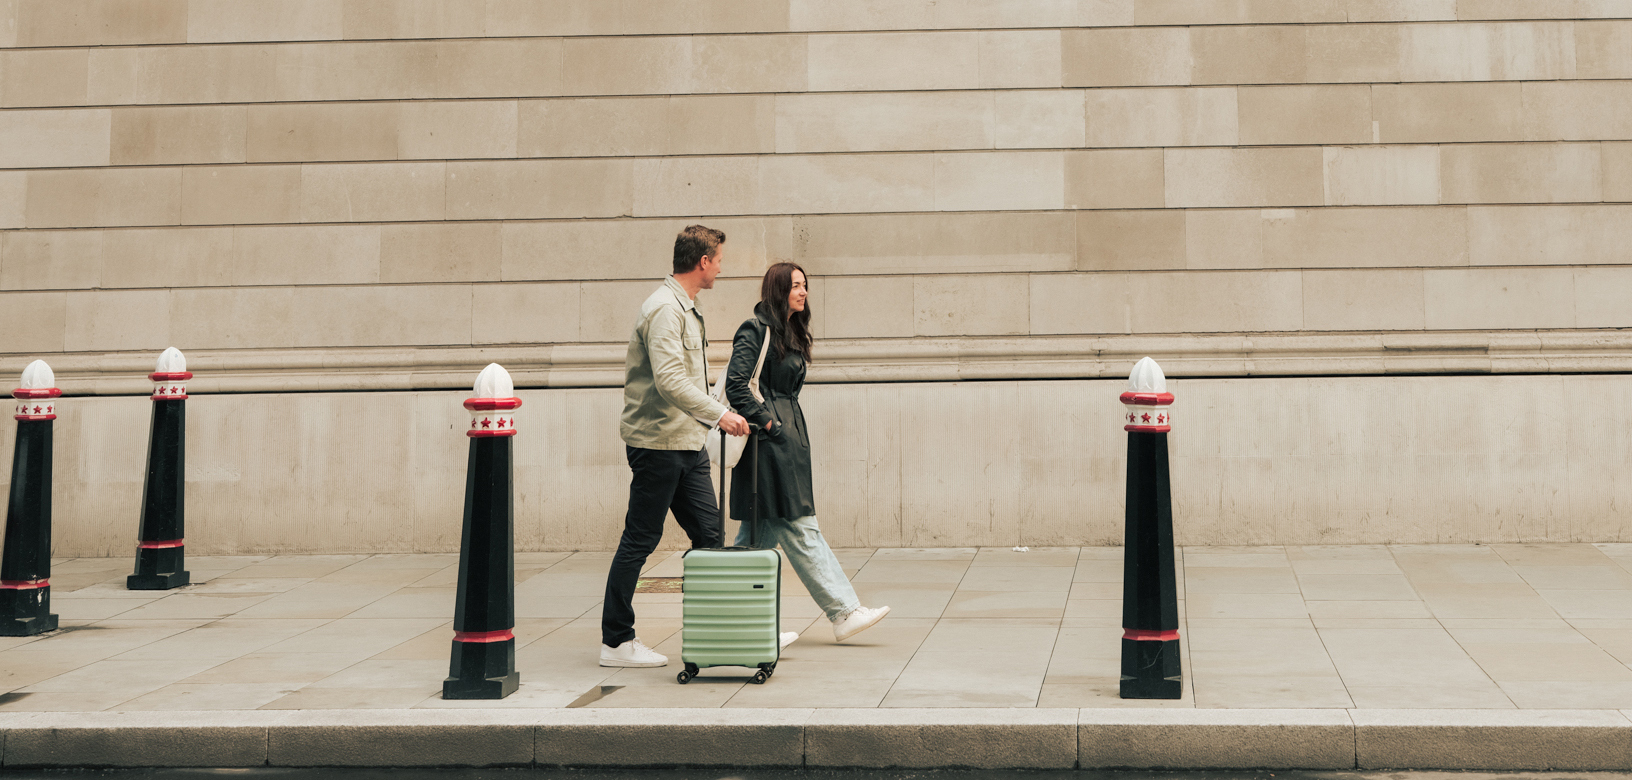 Things to do in the City of London - man and woman walking on city pavement with luggage